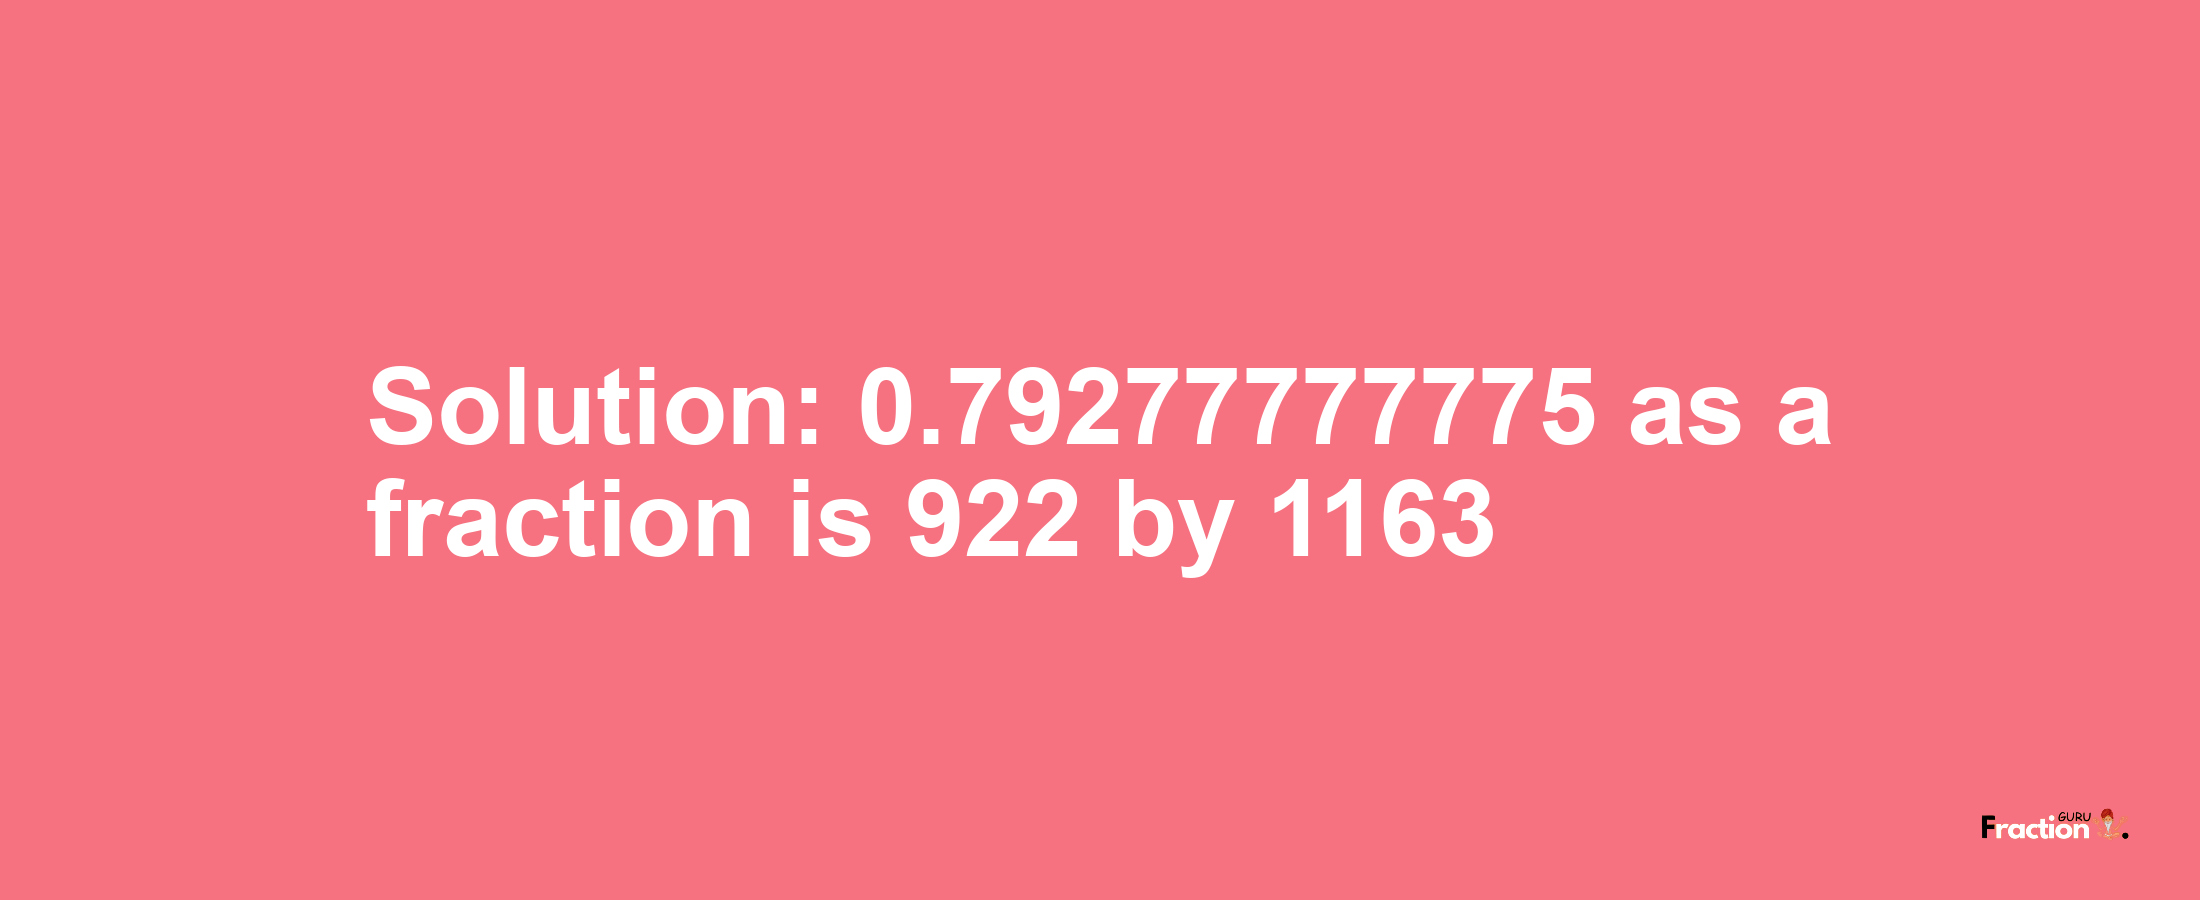 Solution:0.79277777775 as a fraction is 922/1163